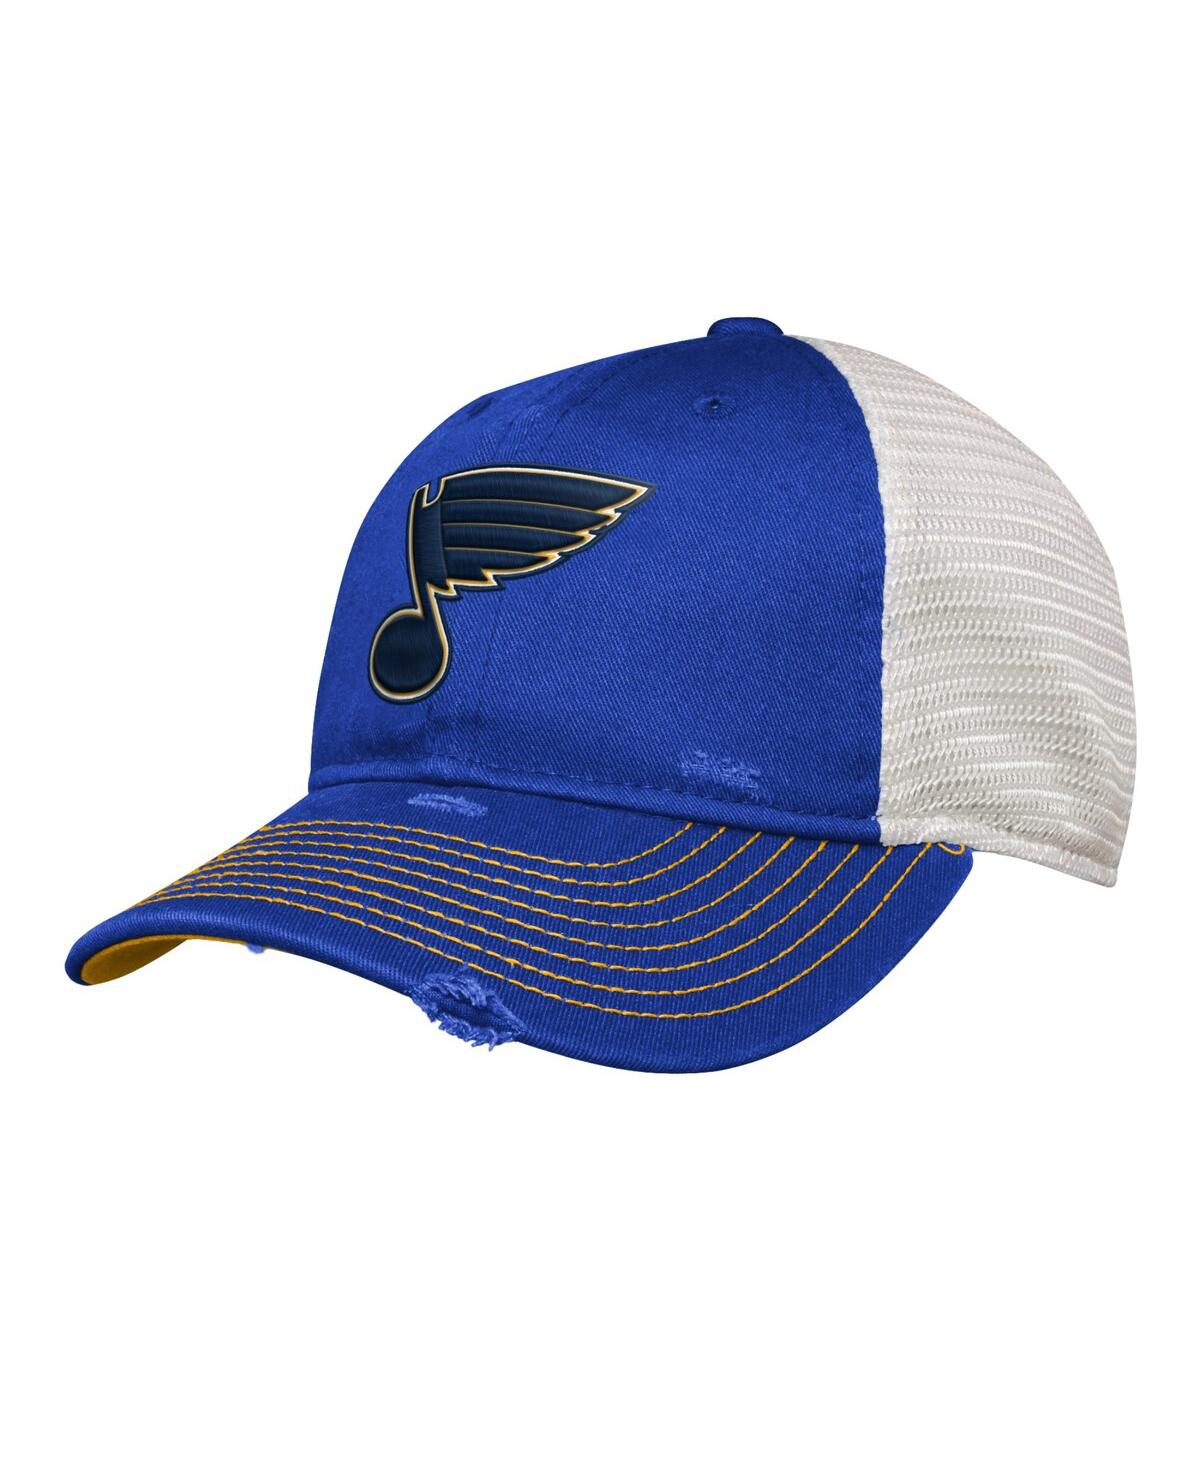 Shop Outerstuff Youth Boys Blue Distressed St. Louis Blues Slouch Trucker Adjustable Hat